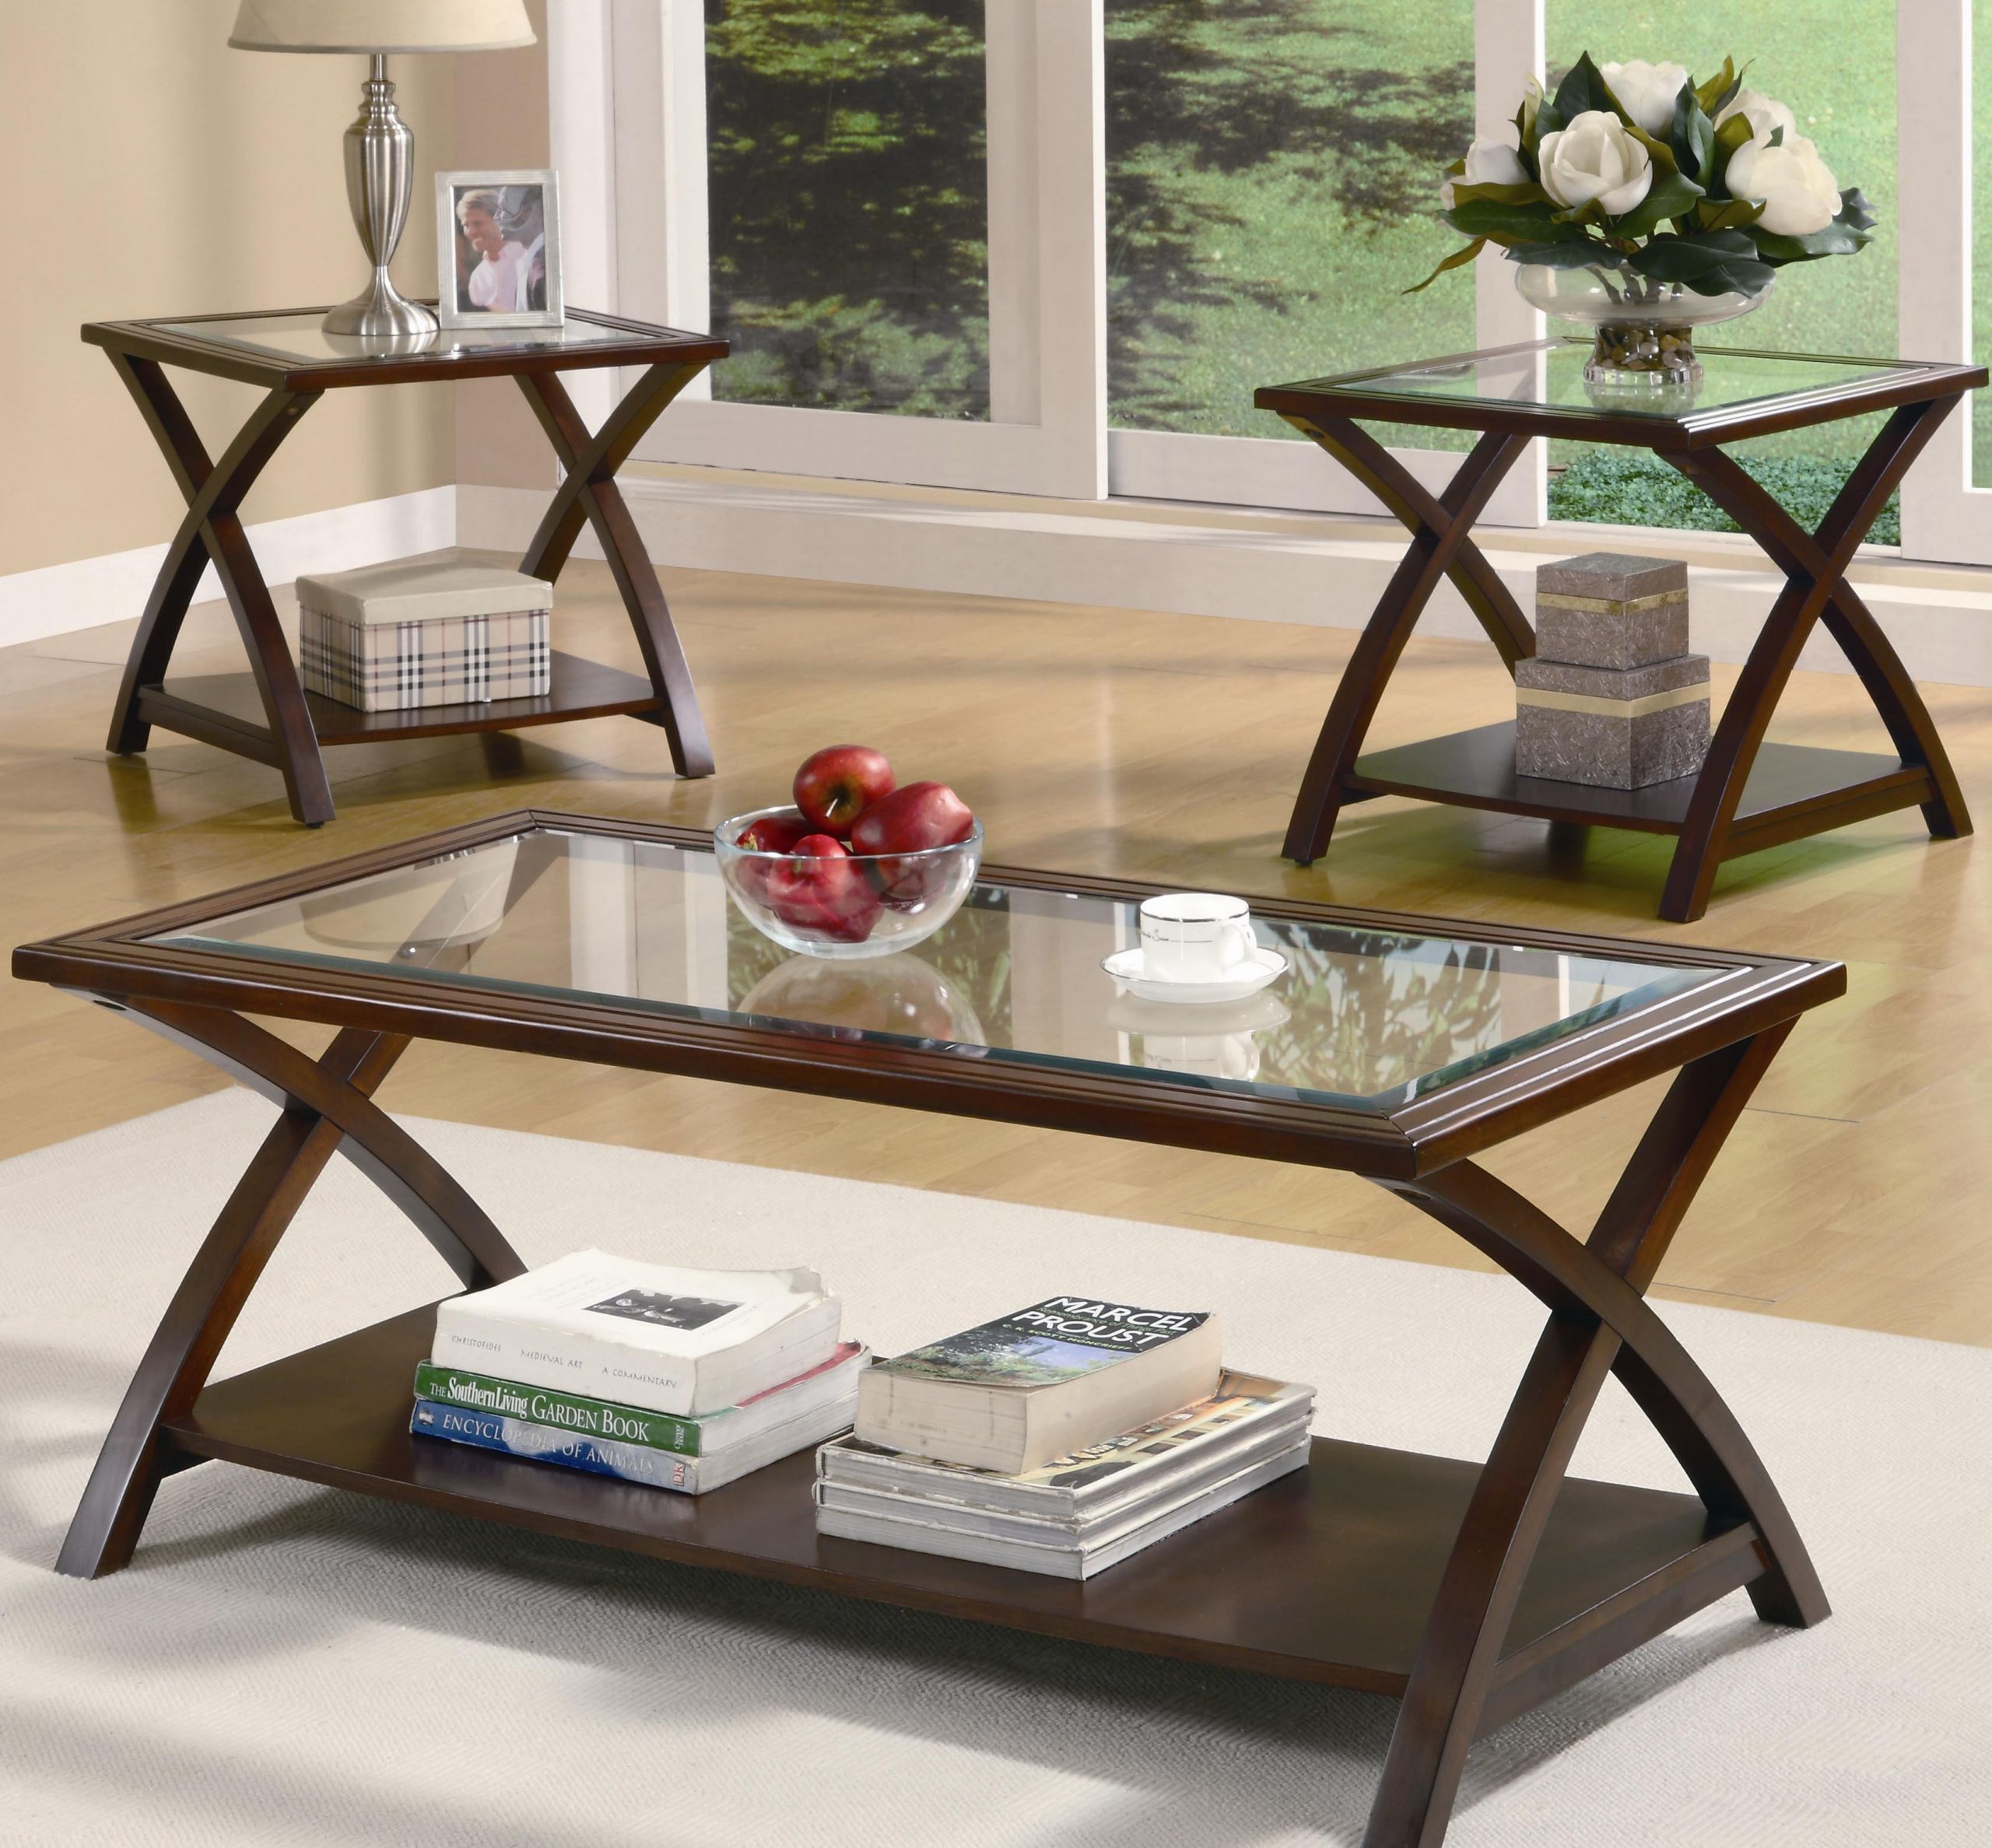 Living Room Coffee Table Sets
 Coaster Furniture 3 Piece “X” Occasional Table Set